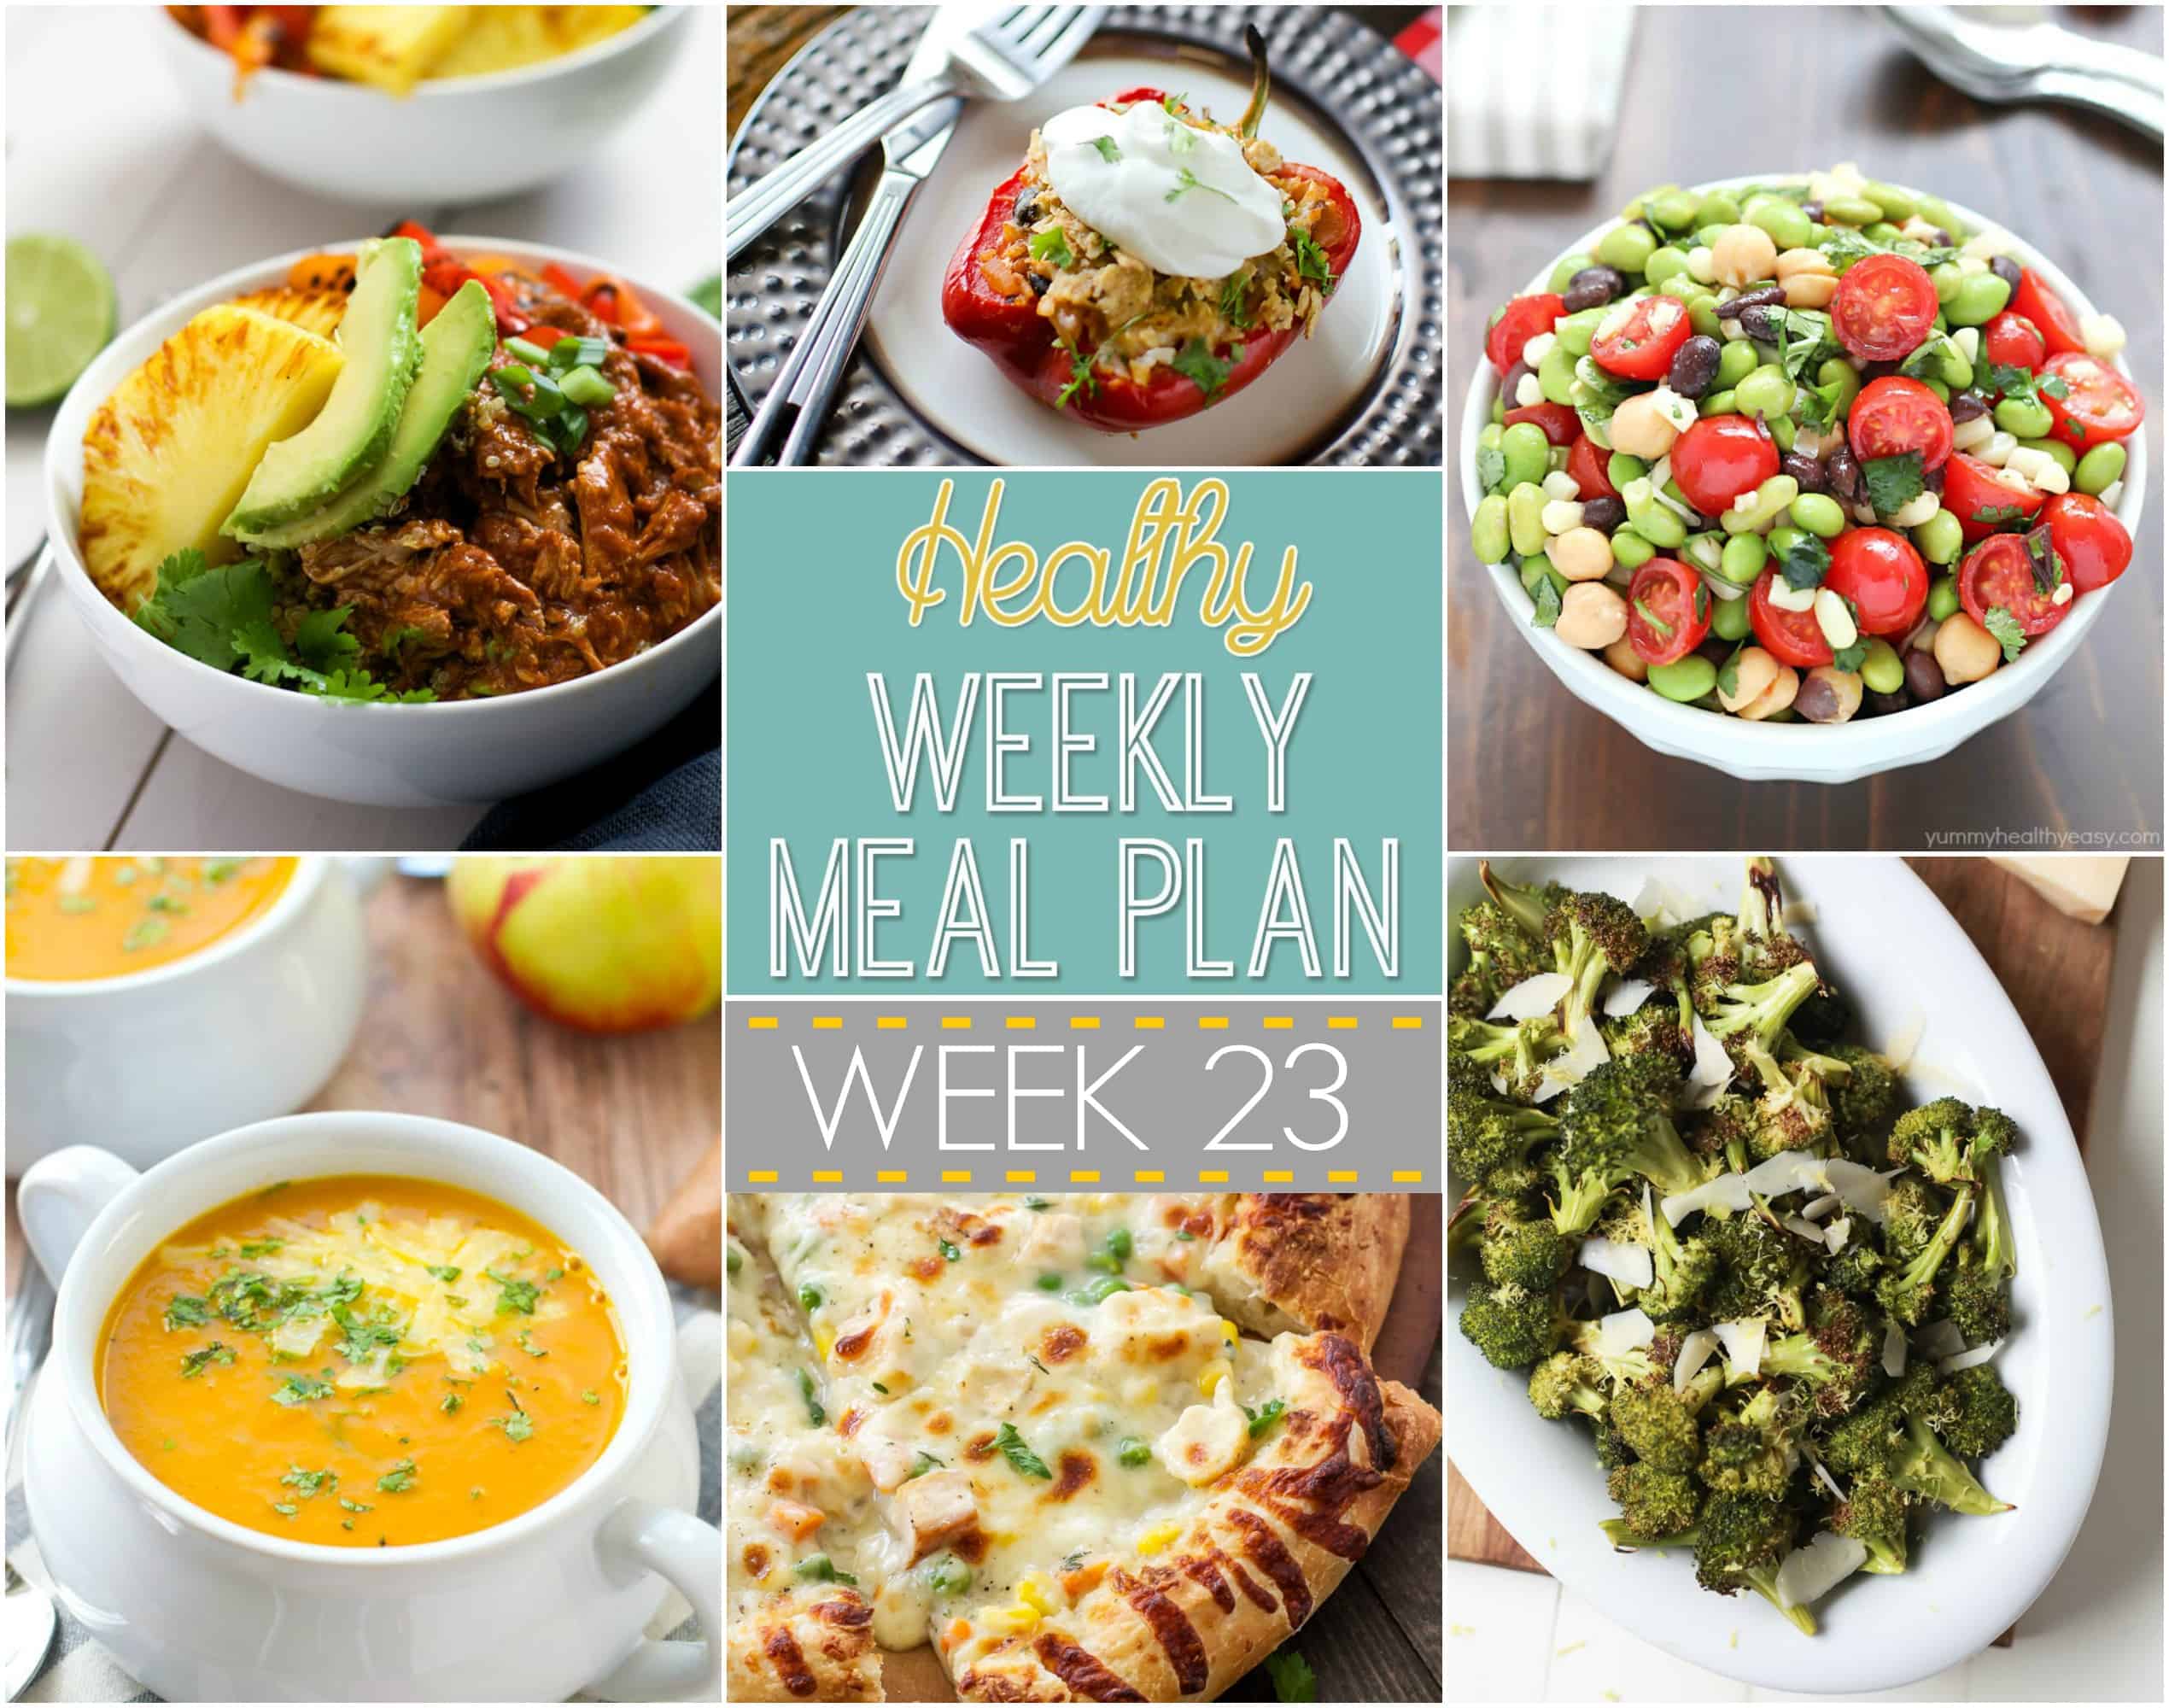 Healthy recipes and meal plans